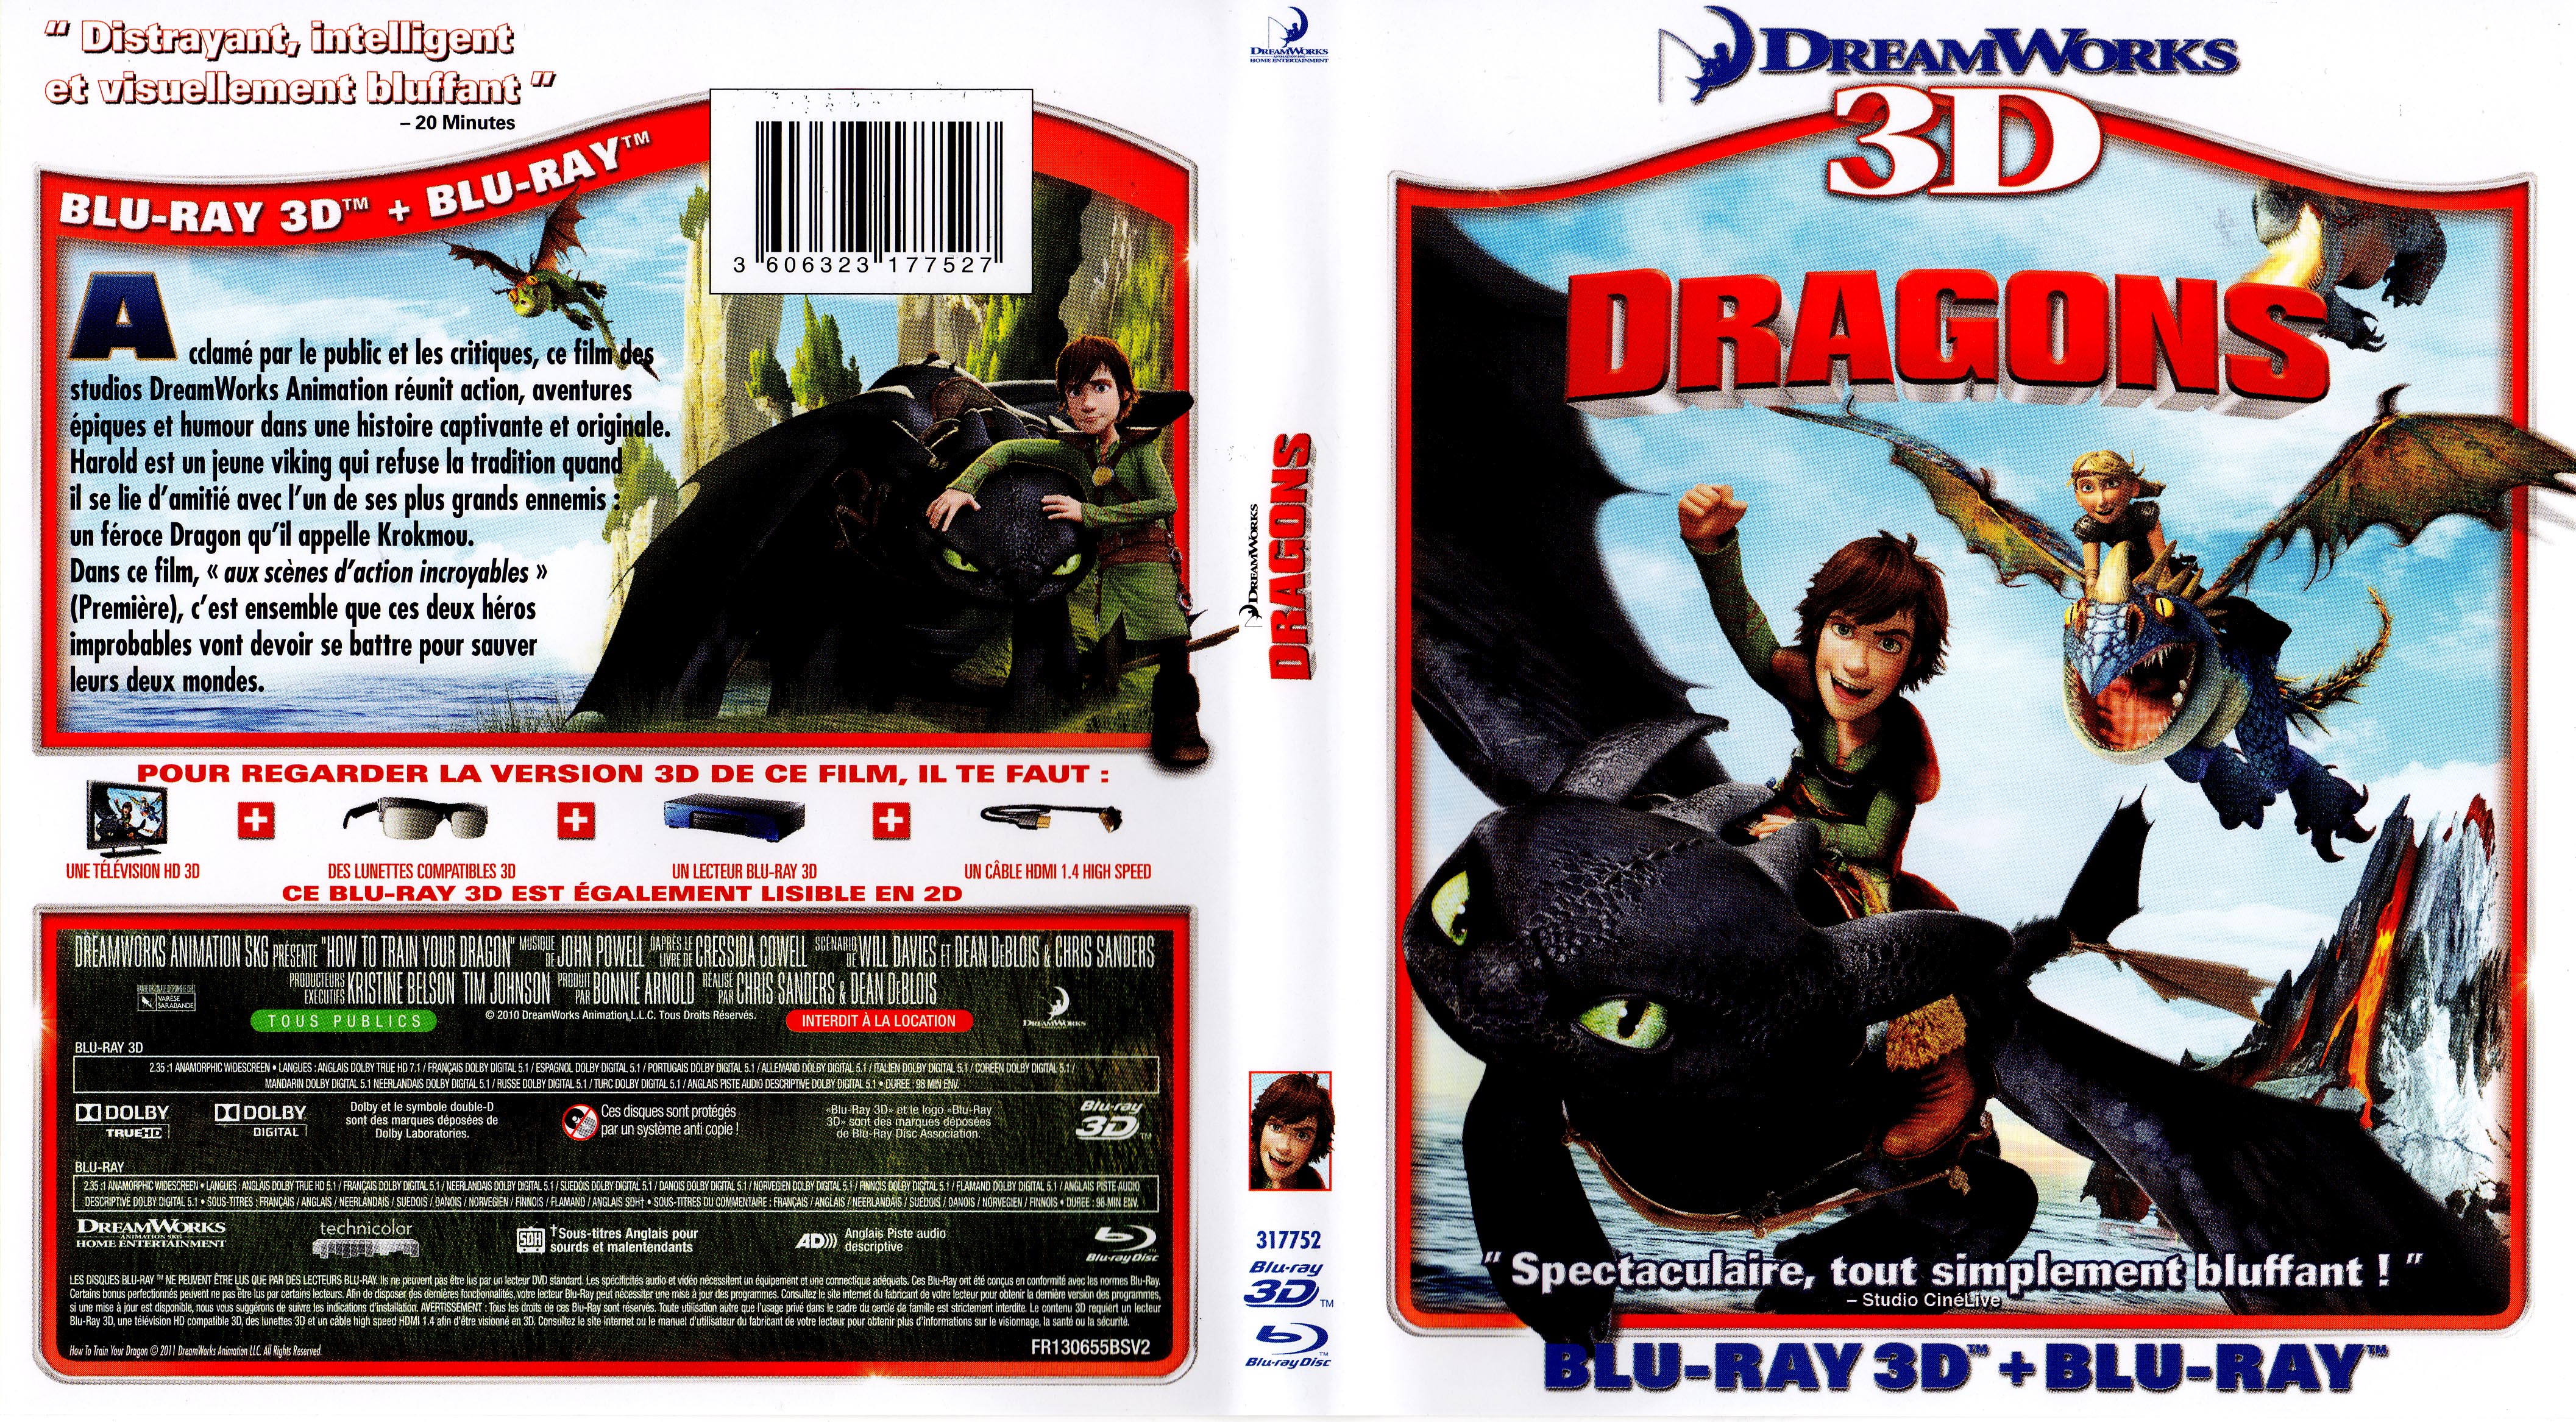 Jaquette DVD Dragons 3D (BLU-RAY)